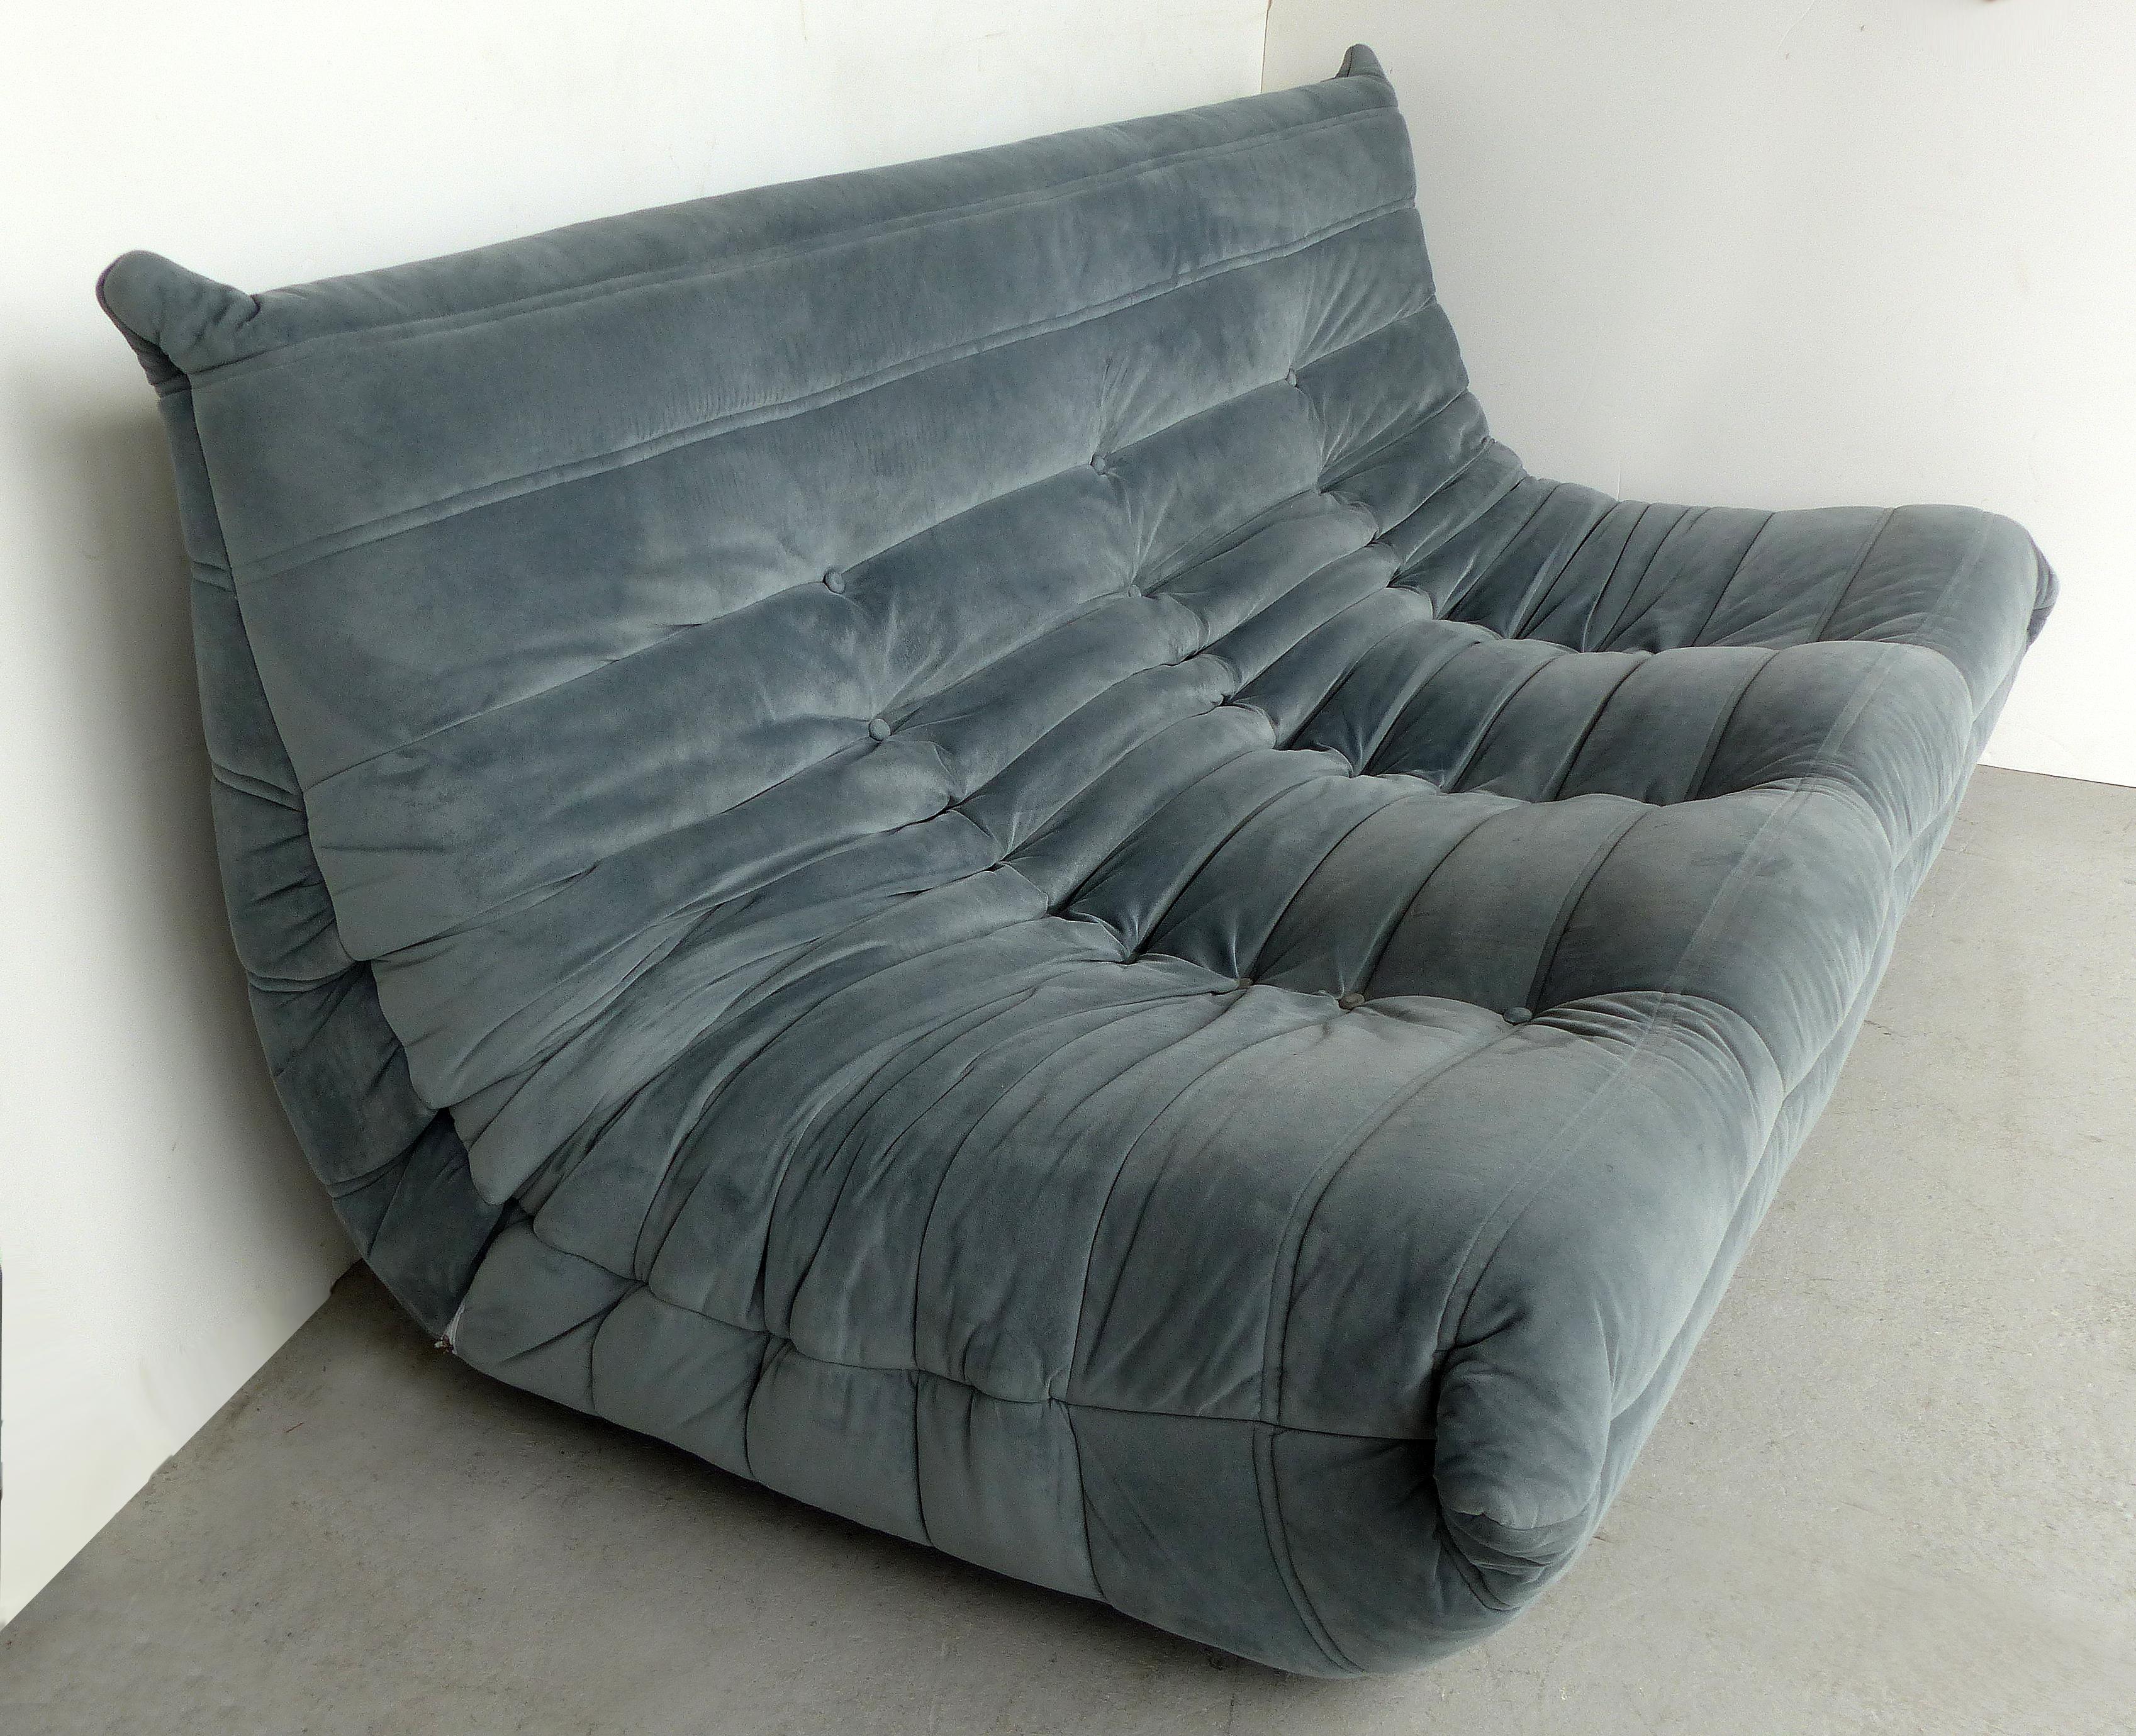  Michel Ducaroy for Ligne Roset 'France' Togo Three-Seat Sofa

Offered for sale is a three person 